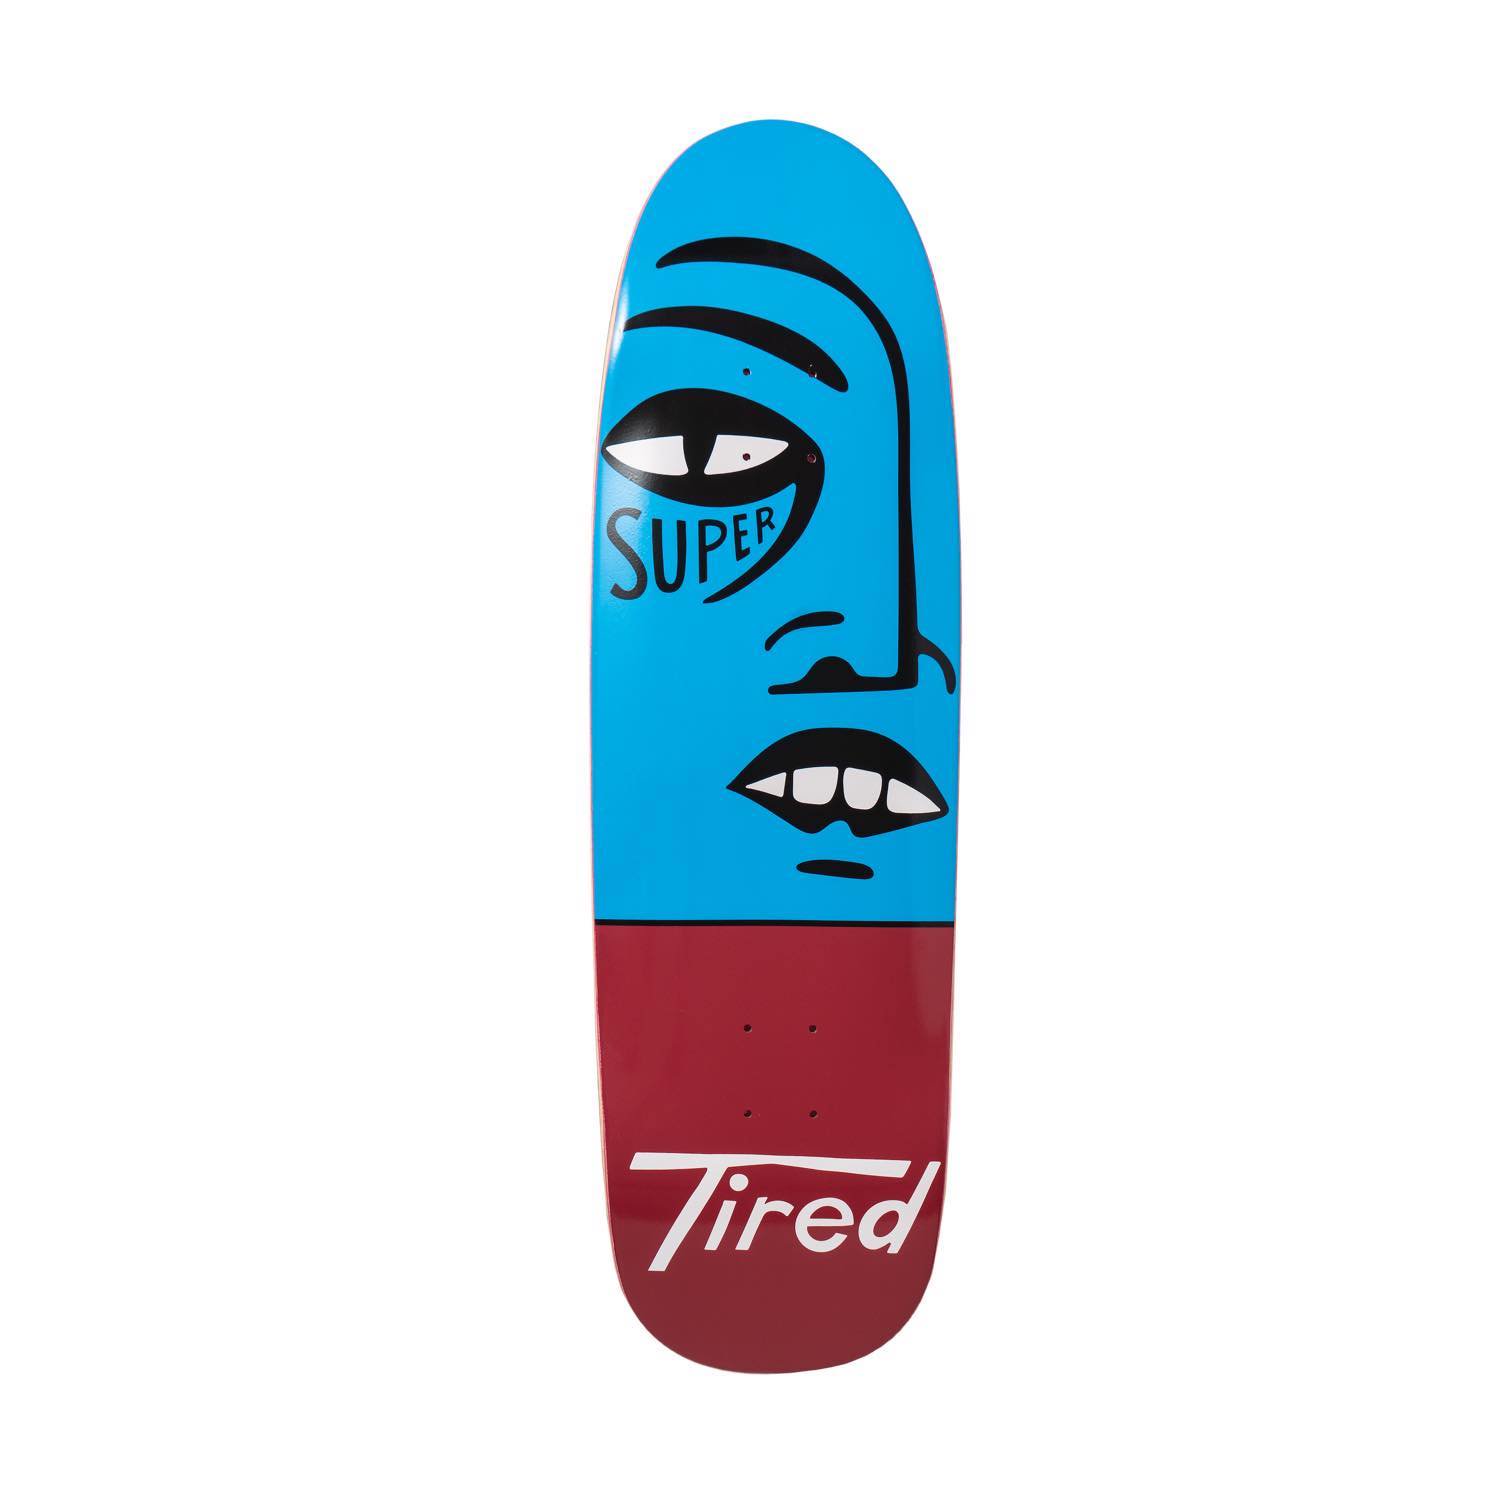 <img class='new_mark_img1' src='https://img.shop-pro.jp/img/new/icons8.gif' style='border:none;display:inline;margin:0px;padding:0px;width:auto;' />Tired å / SUPER TIRED SKATEBOARD/SIGAR